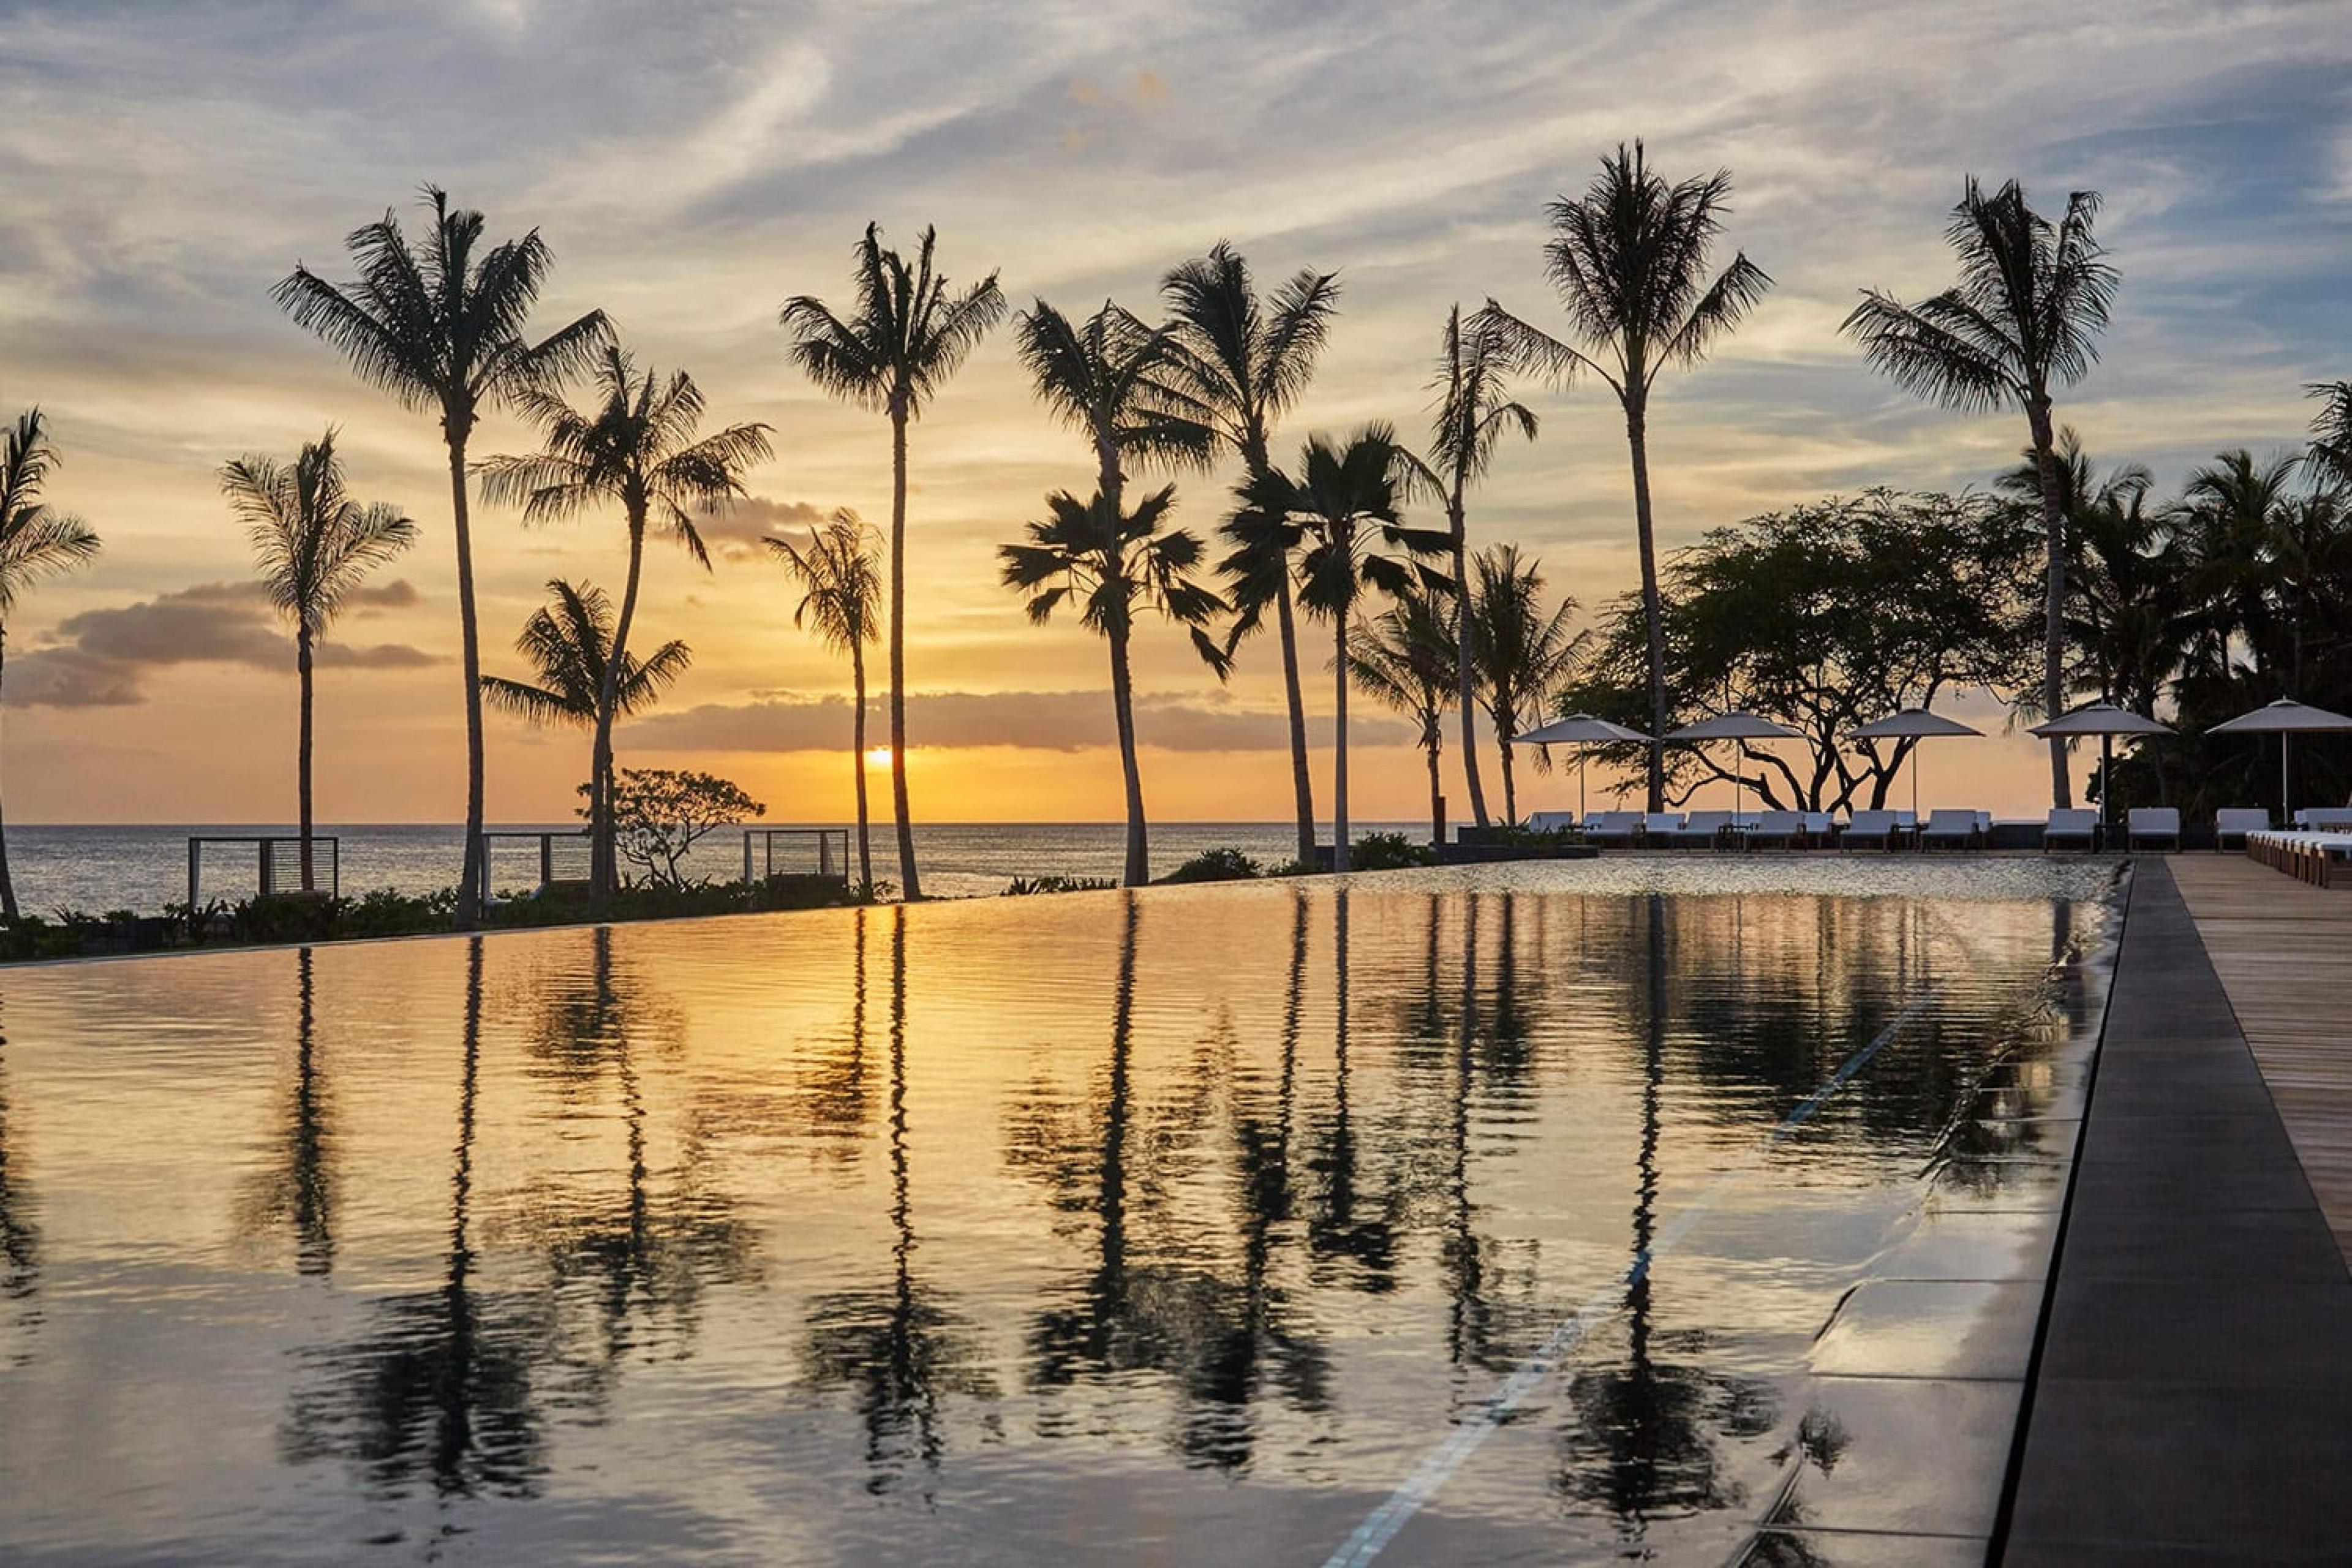 sunset over a pool with palm trees reflecting